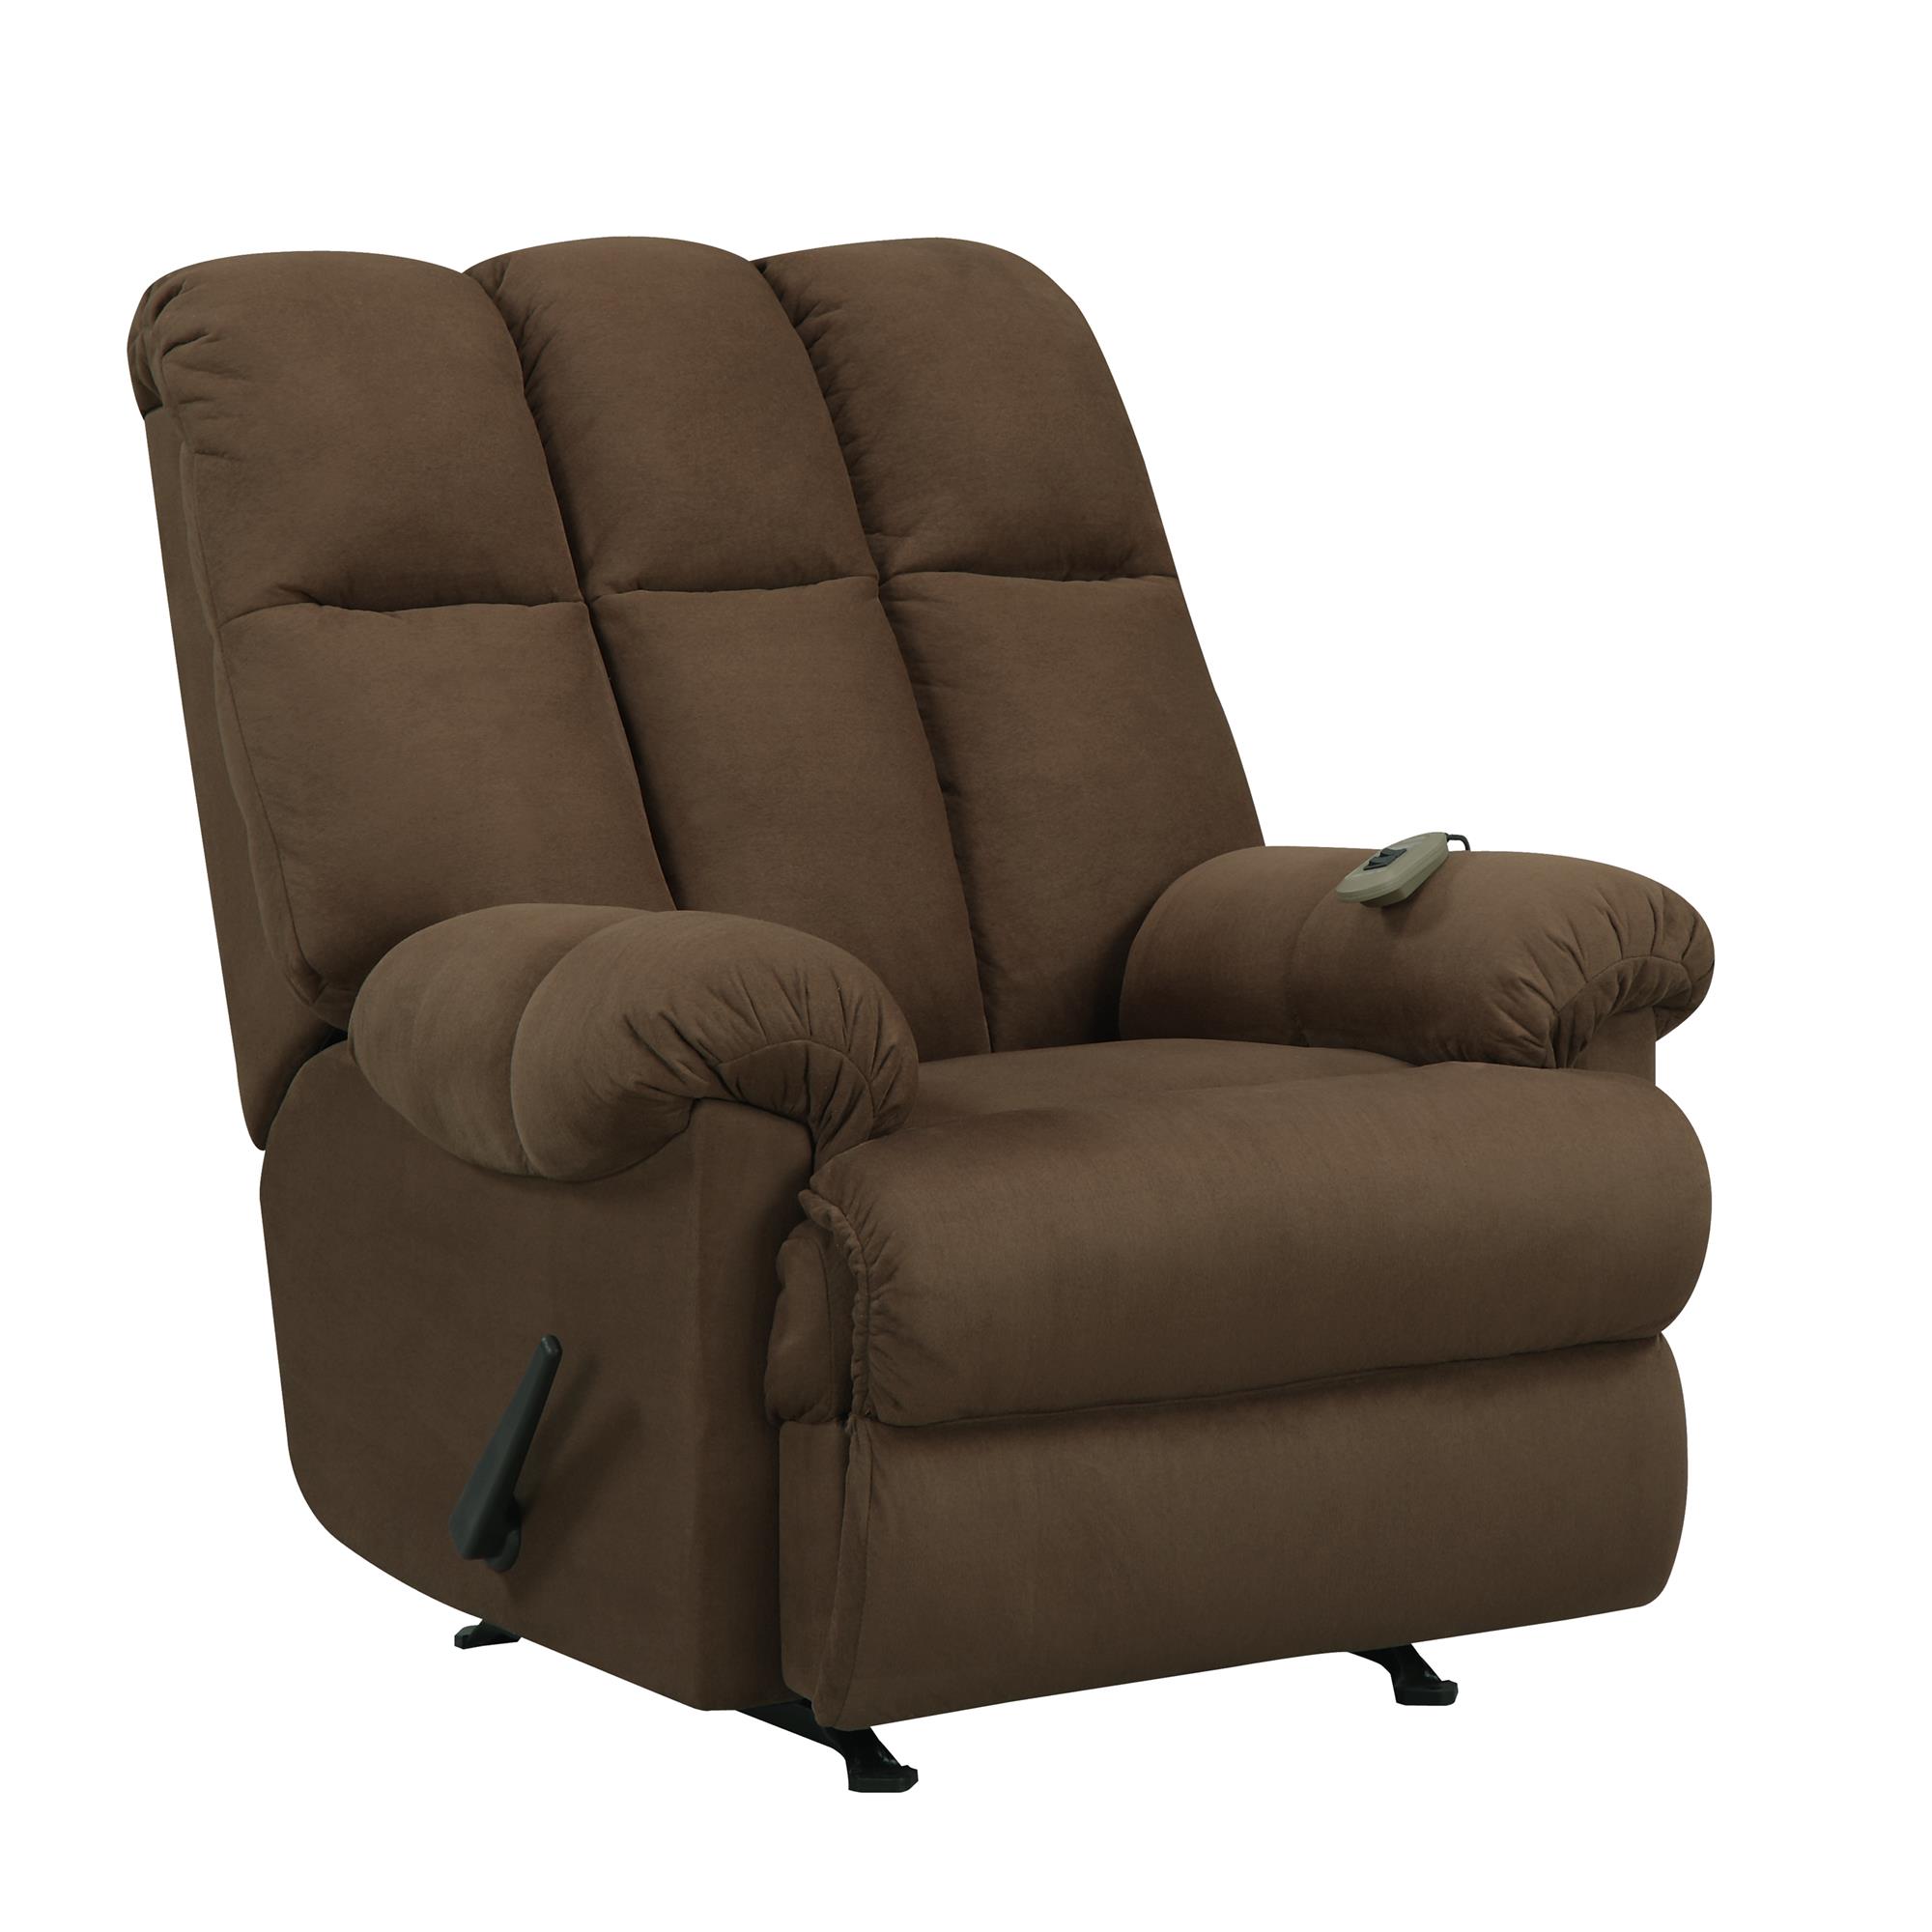 Elm & Oak Padded Massage Chair Recliner, Chocolate Upholstery - image 3 of 12